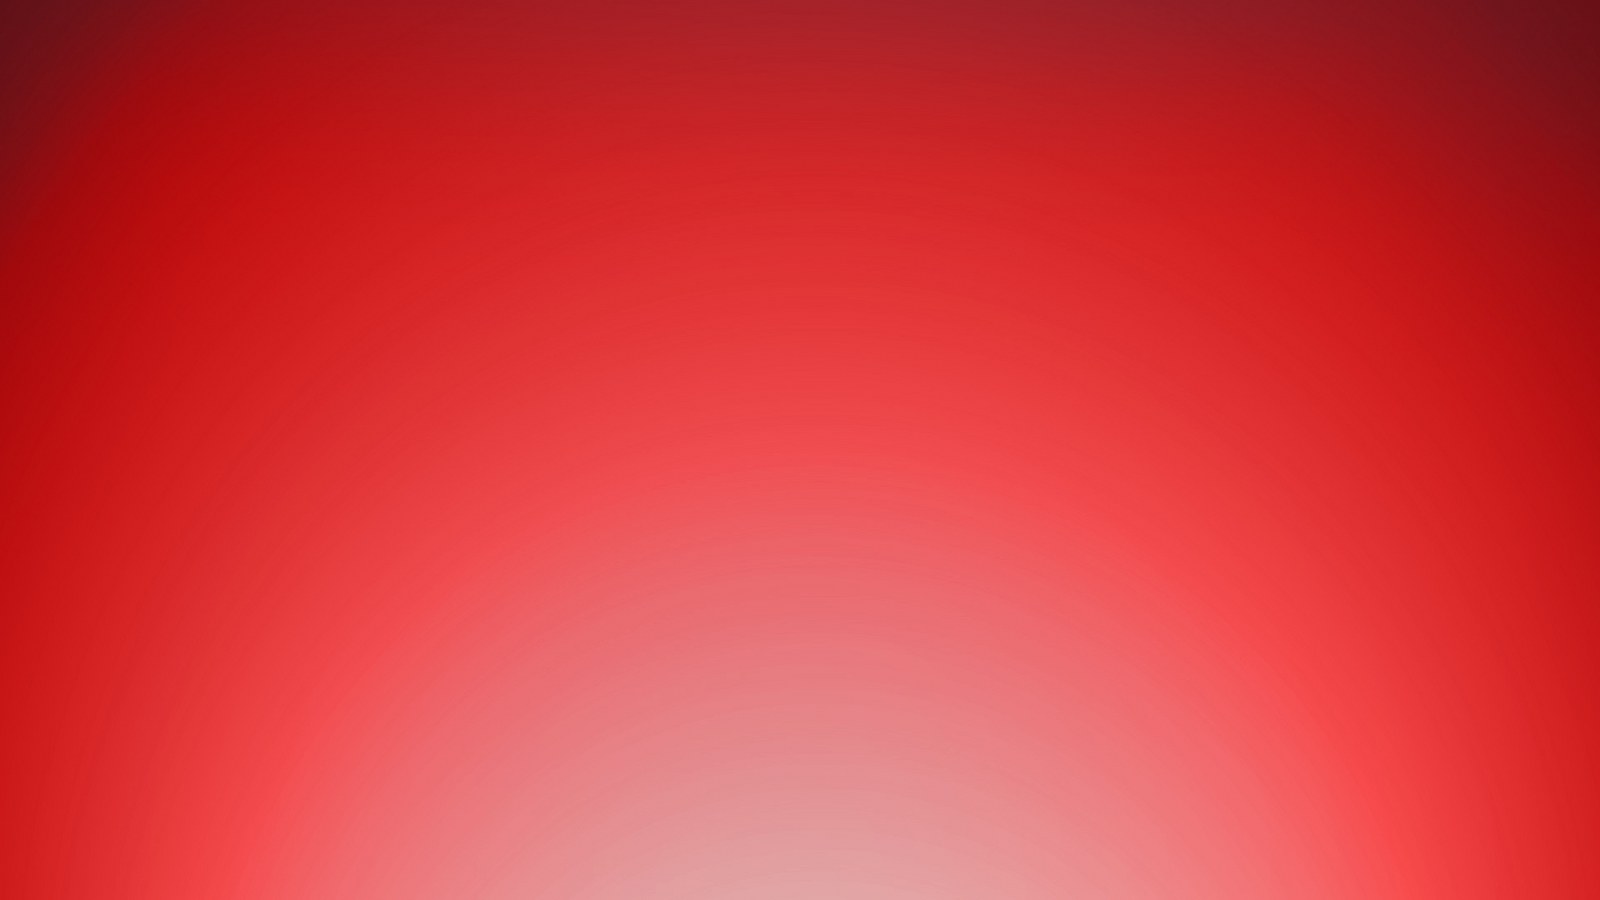 Red background Texture Downloads 1600x900